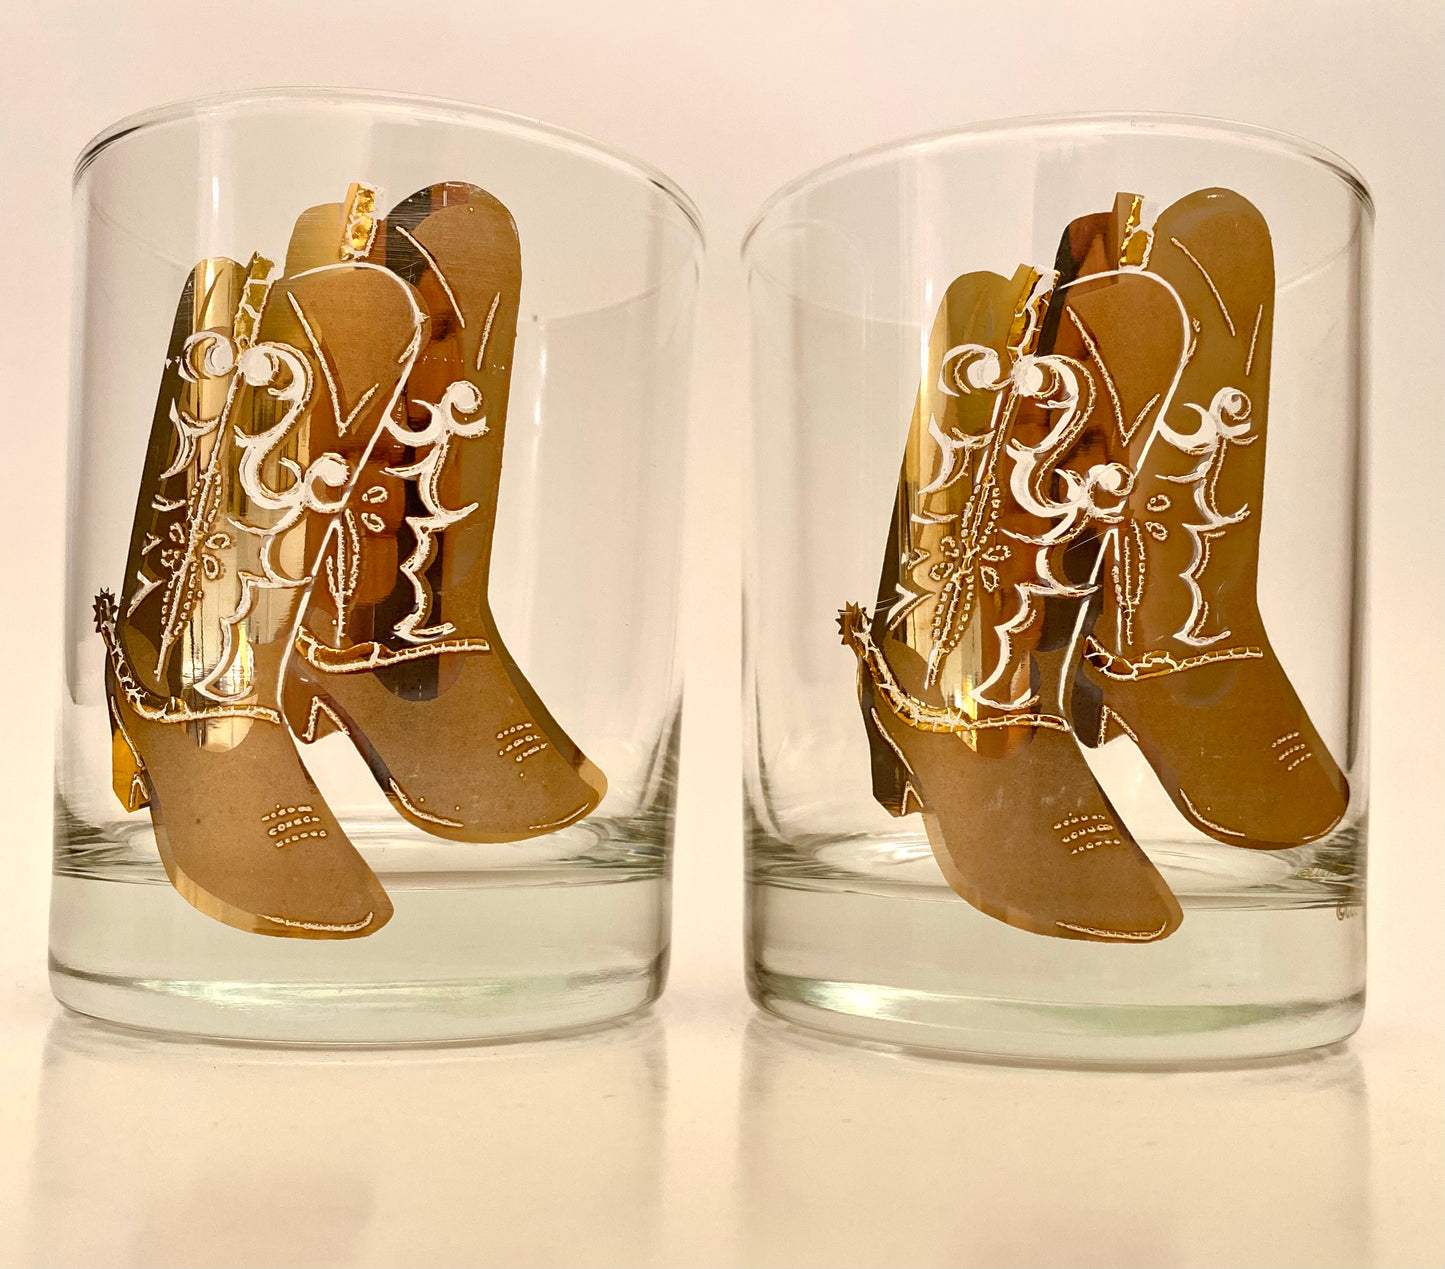 Culver Boots Executive On The Rocks (Pair)